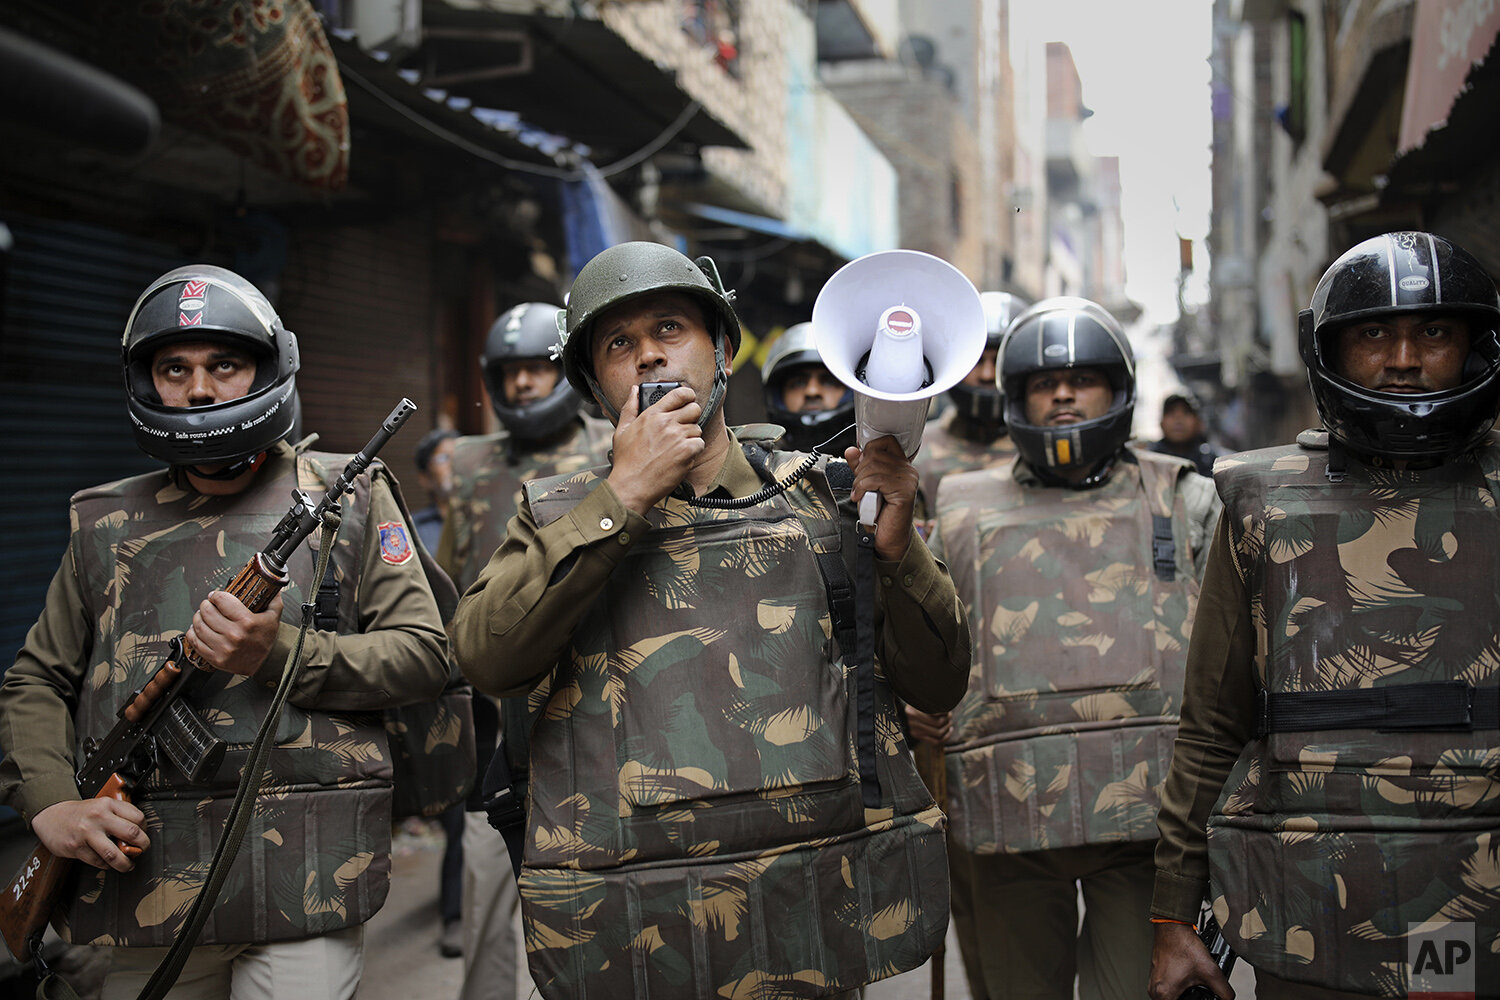  A Delhi police officer makes announcements to warn residents from venturing outside their homes as Indian security officers patrol a street in New Delhi, India, Wednesday, Feb. 26, 2020. At least 20 people were killed in three days of clashes in New